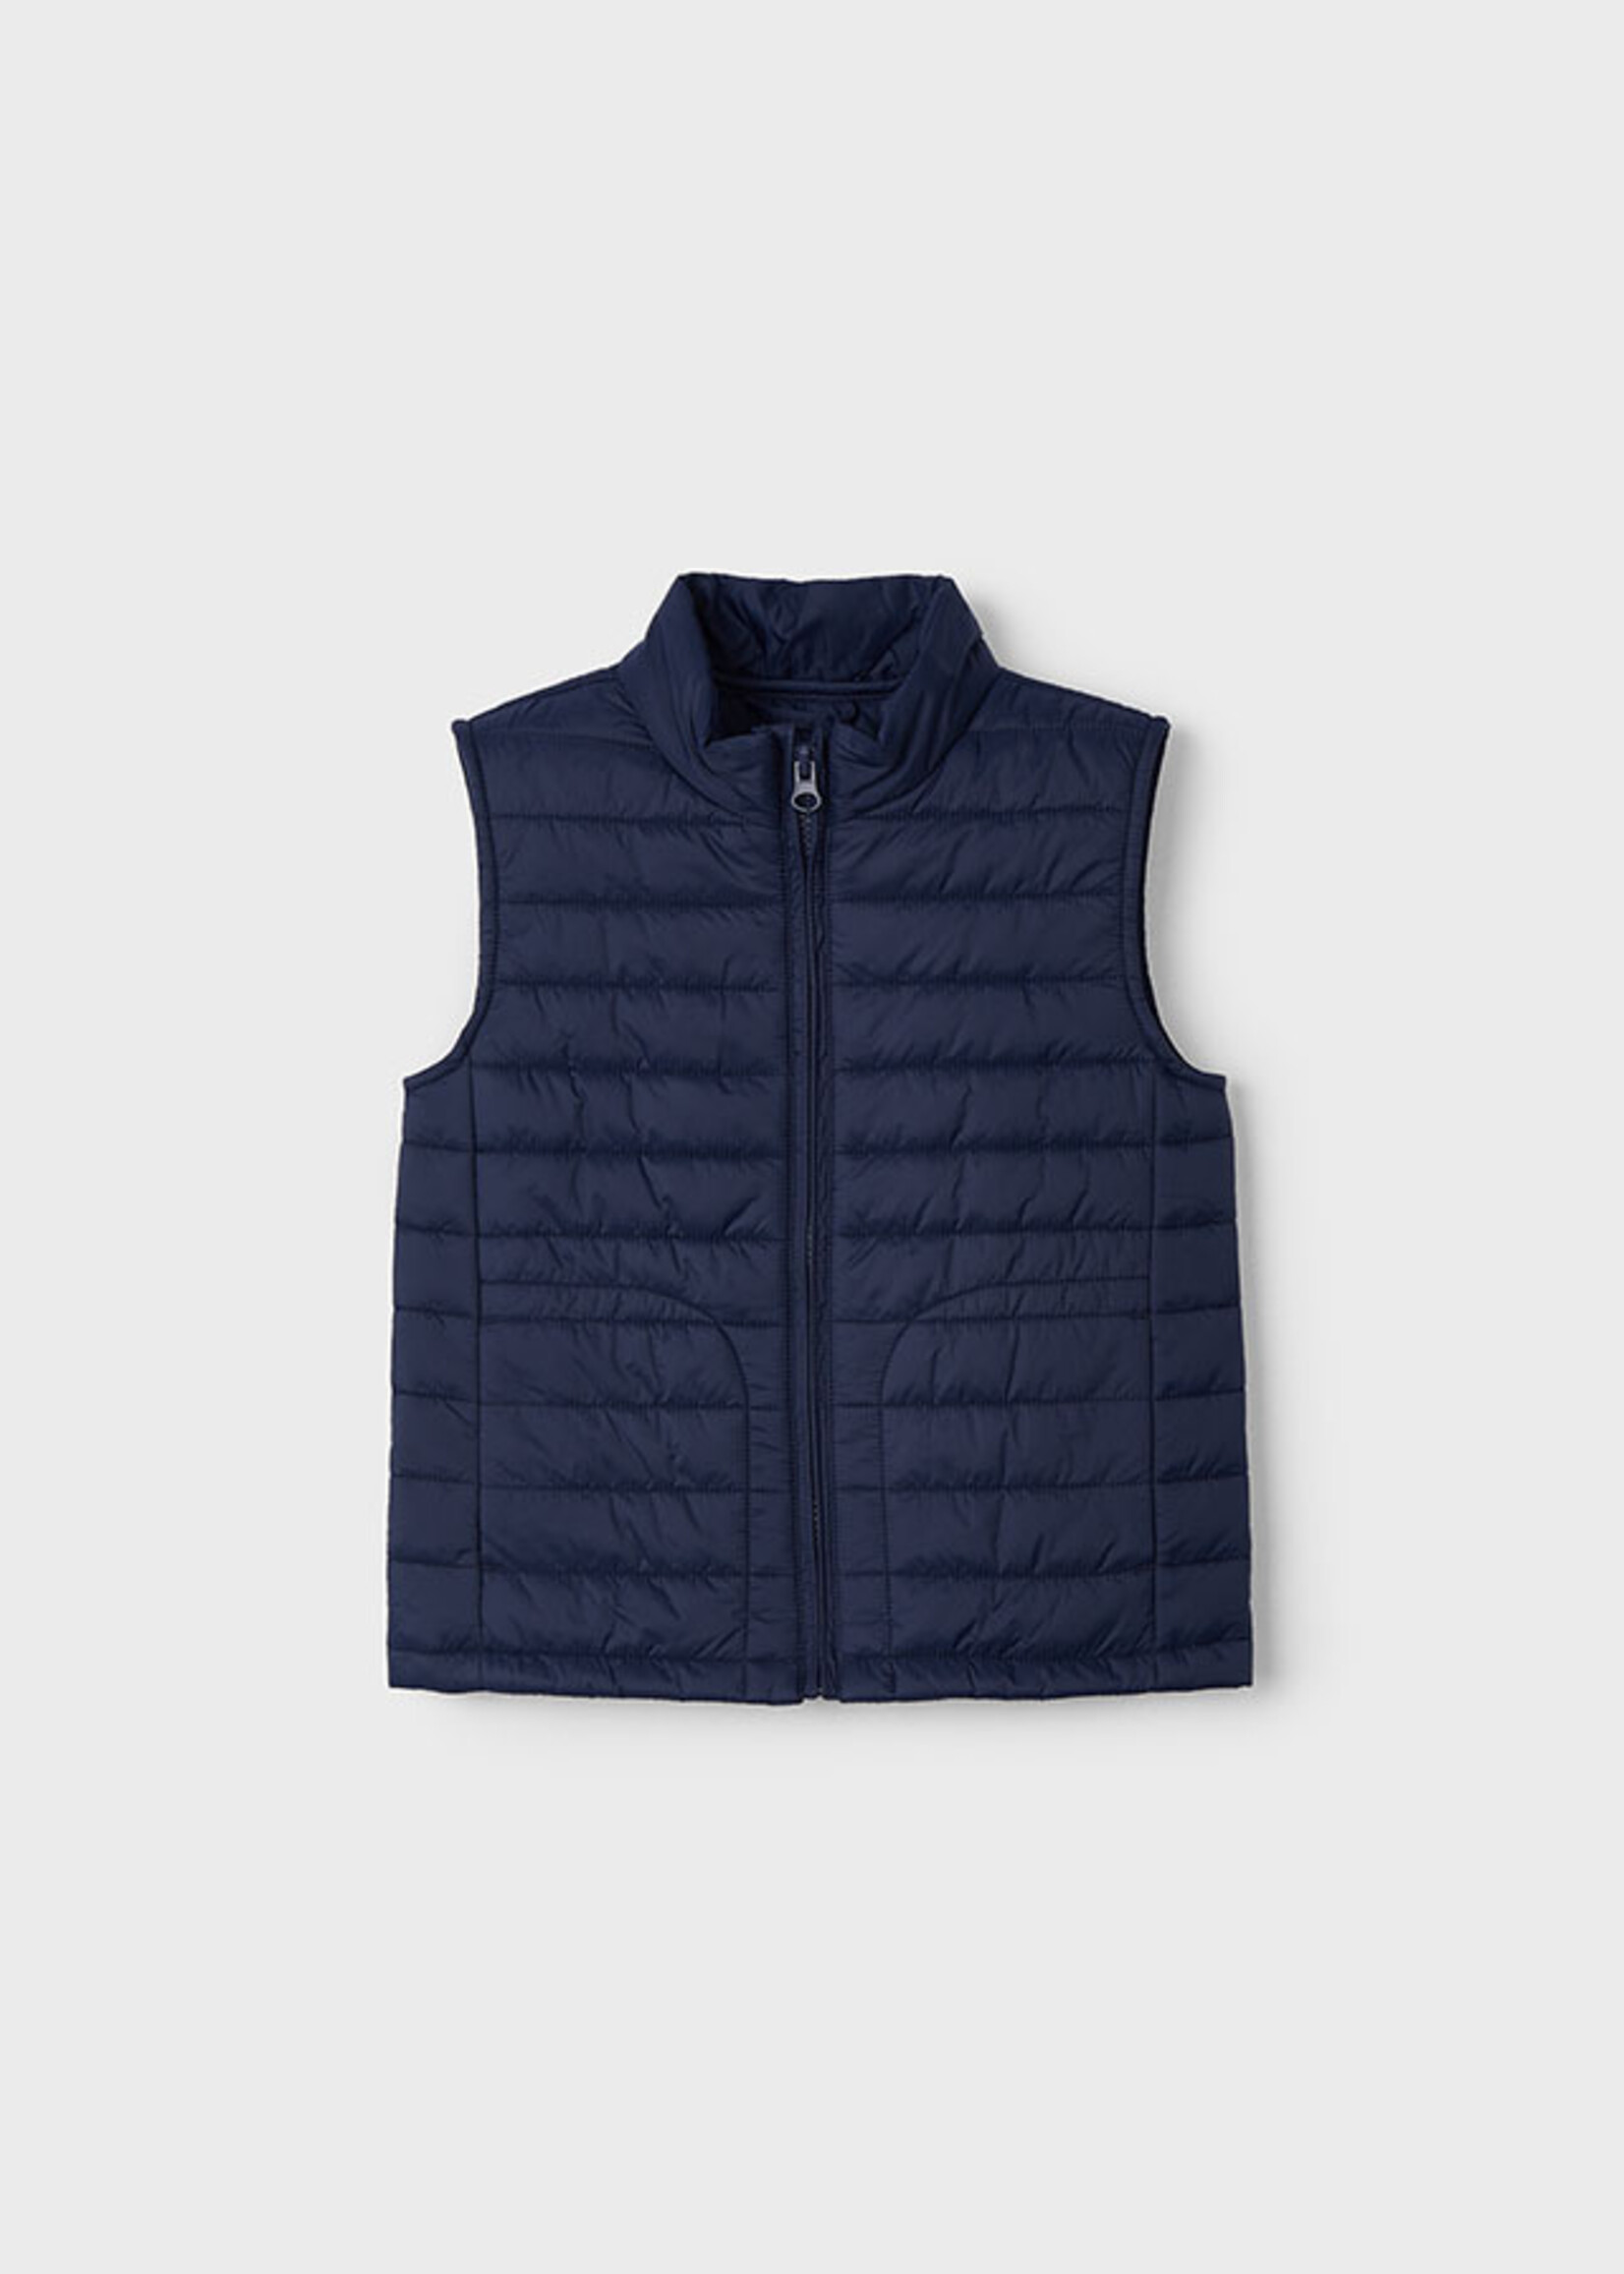 Mayoral Mini Boy             3360 Ultralight quilted vest       Navy